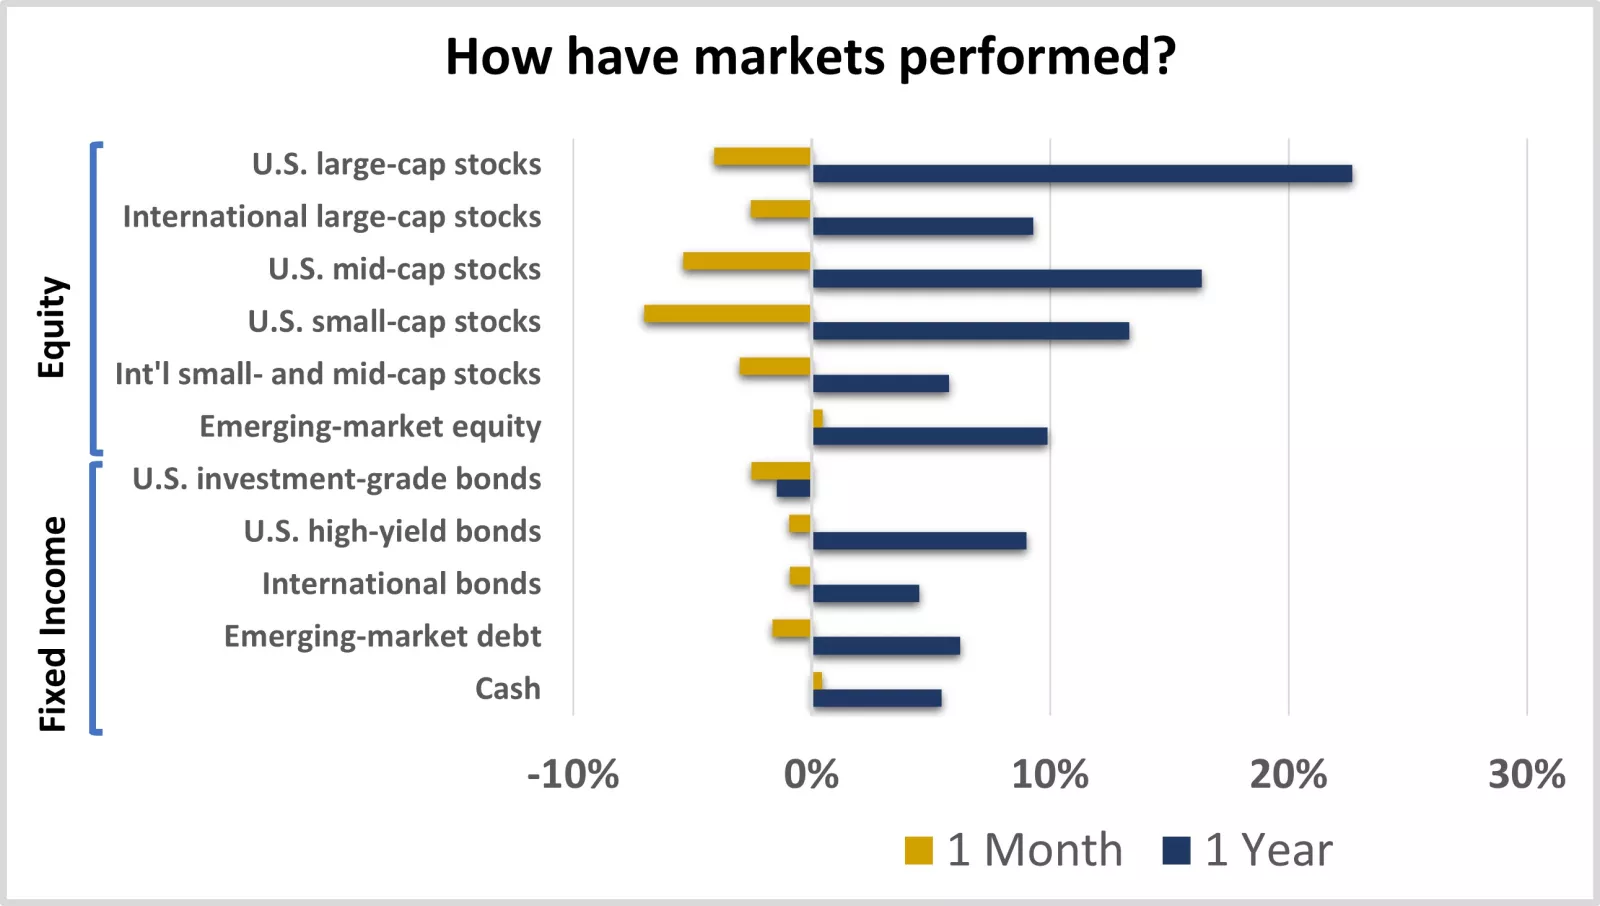  This chart shows the performance of equity and fixed-income markets over the previous month and year.
